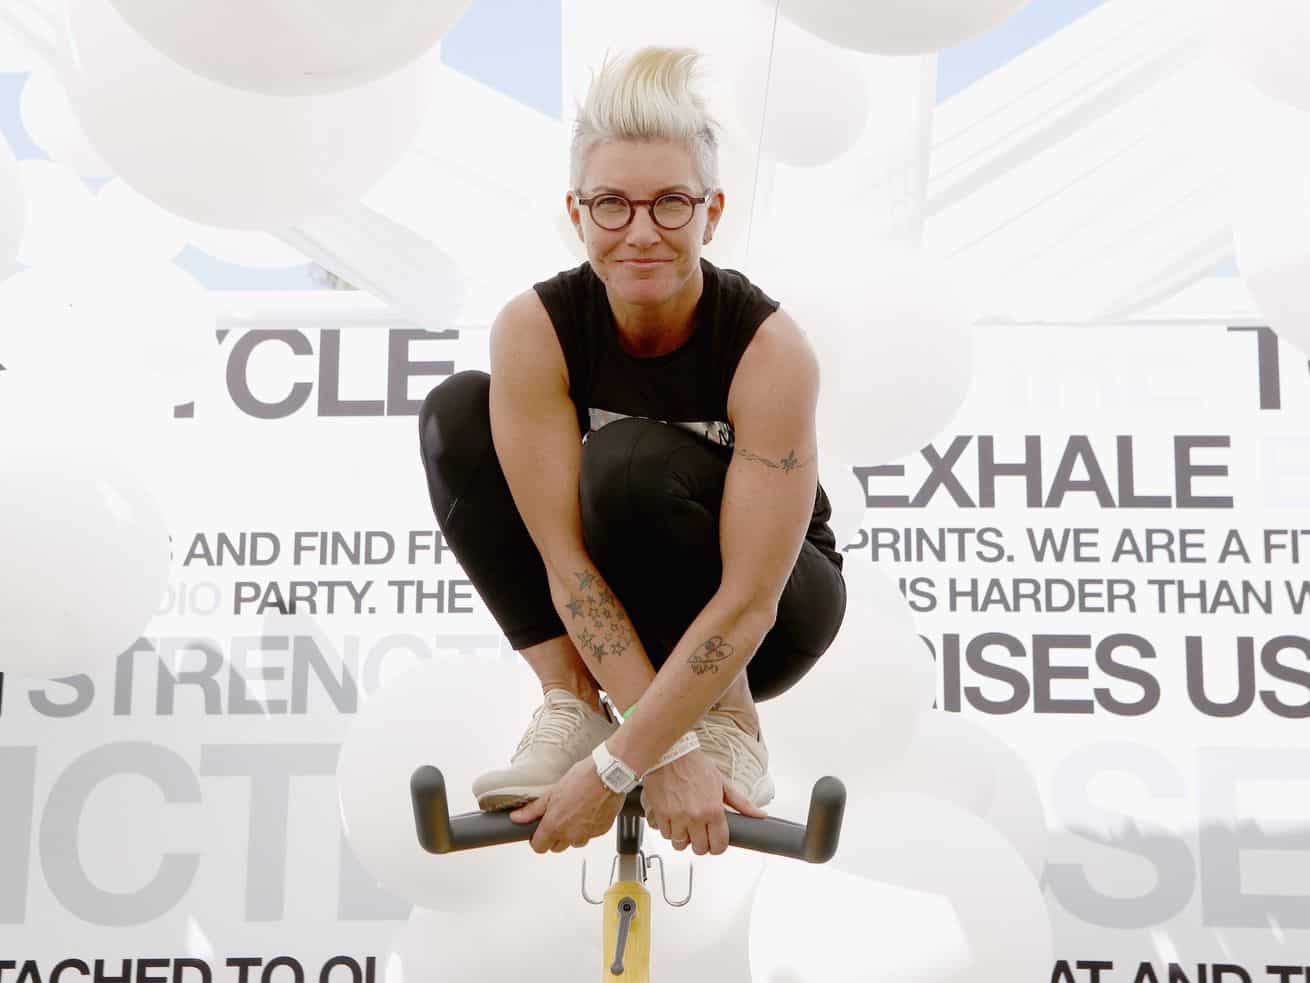 A SoulCycle instructor got a vaccine for being an “educator.” Now she’s in trouble.